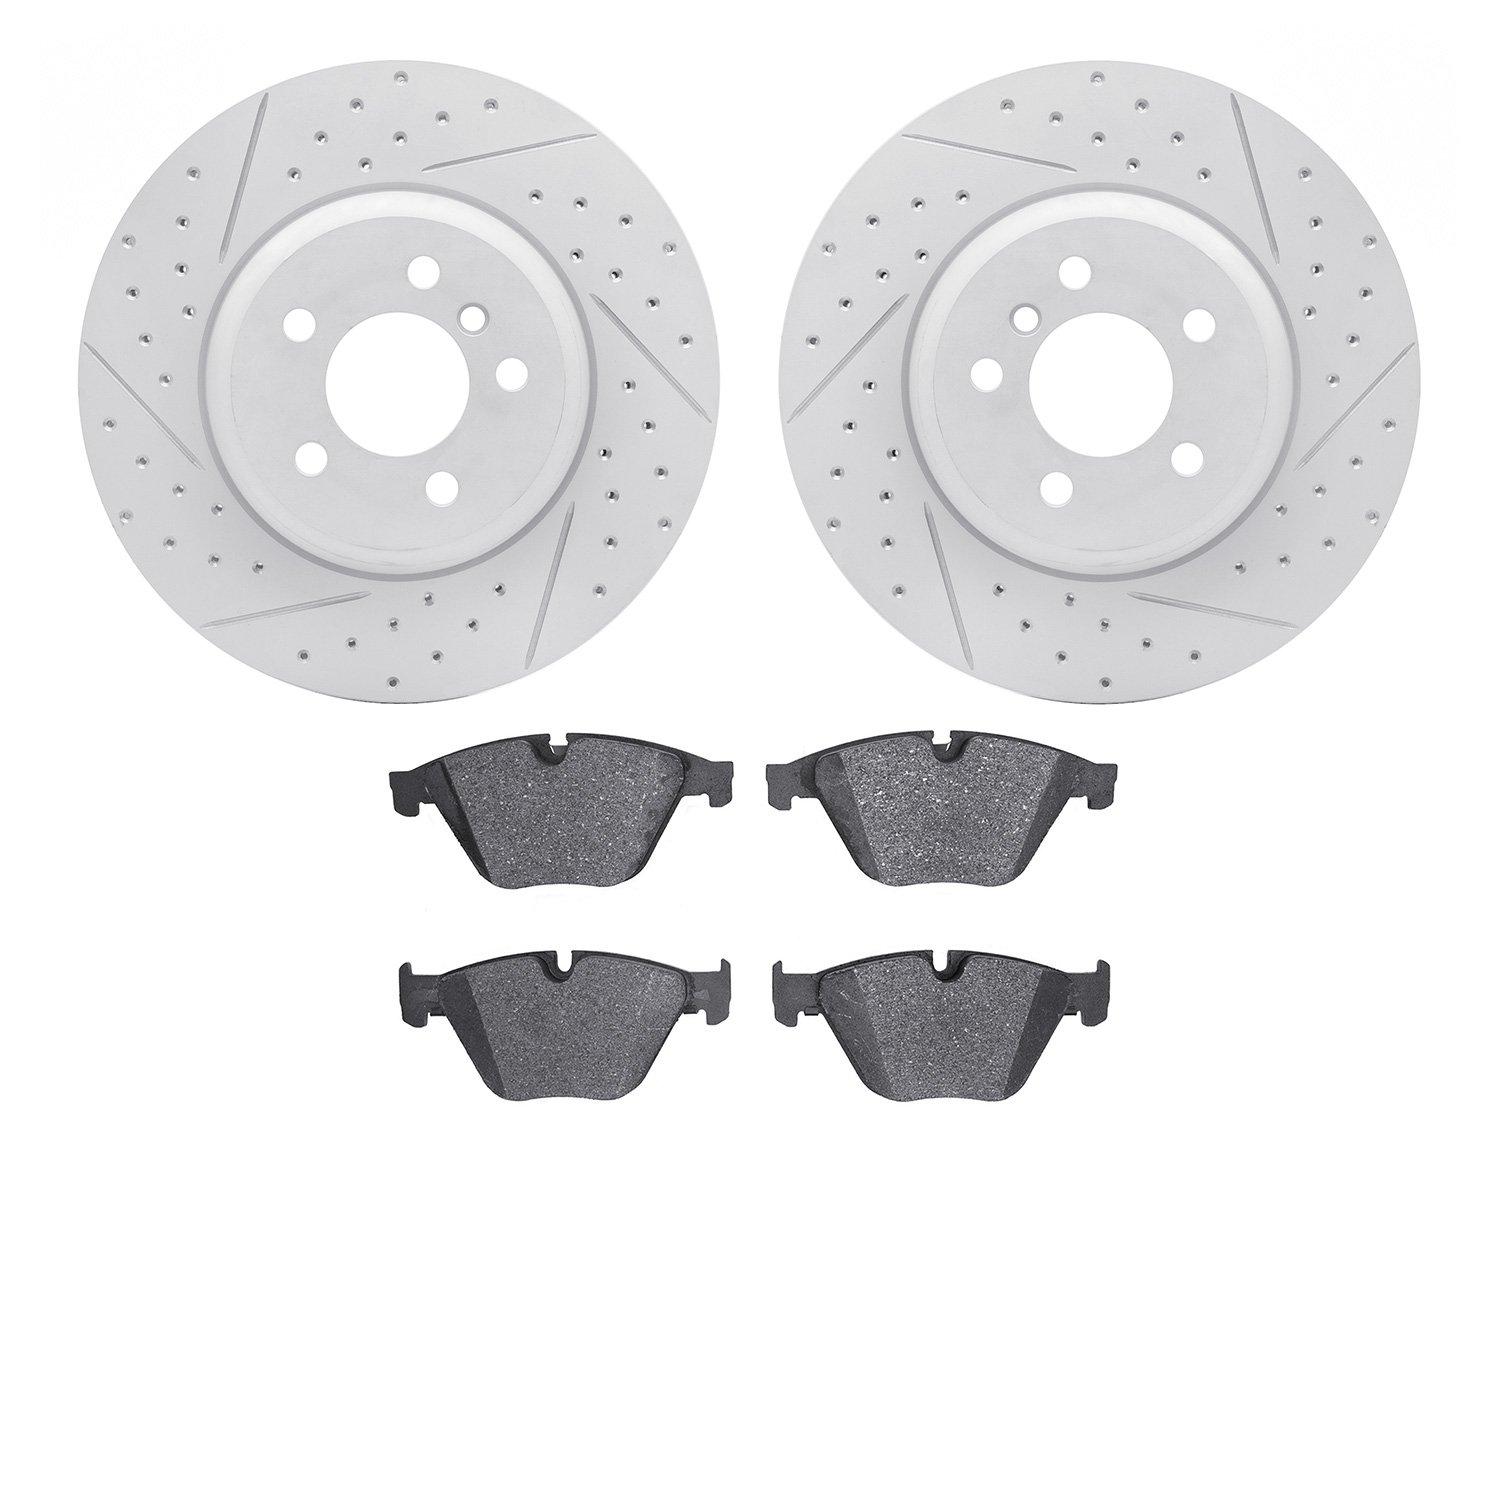 2502-31073 Geoperformance Drilled/Slotted Rotors w/5000 Advanced Brake Pads Kit, 2011-2018 BMW, Position: Front